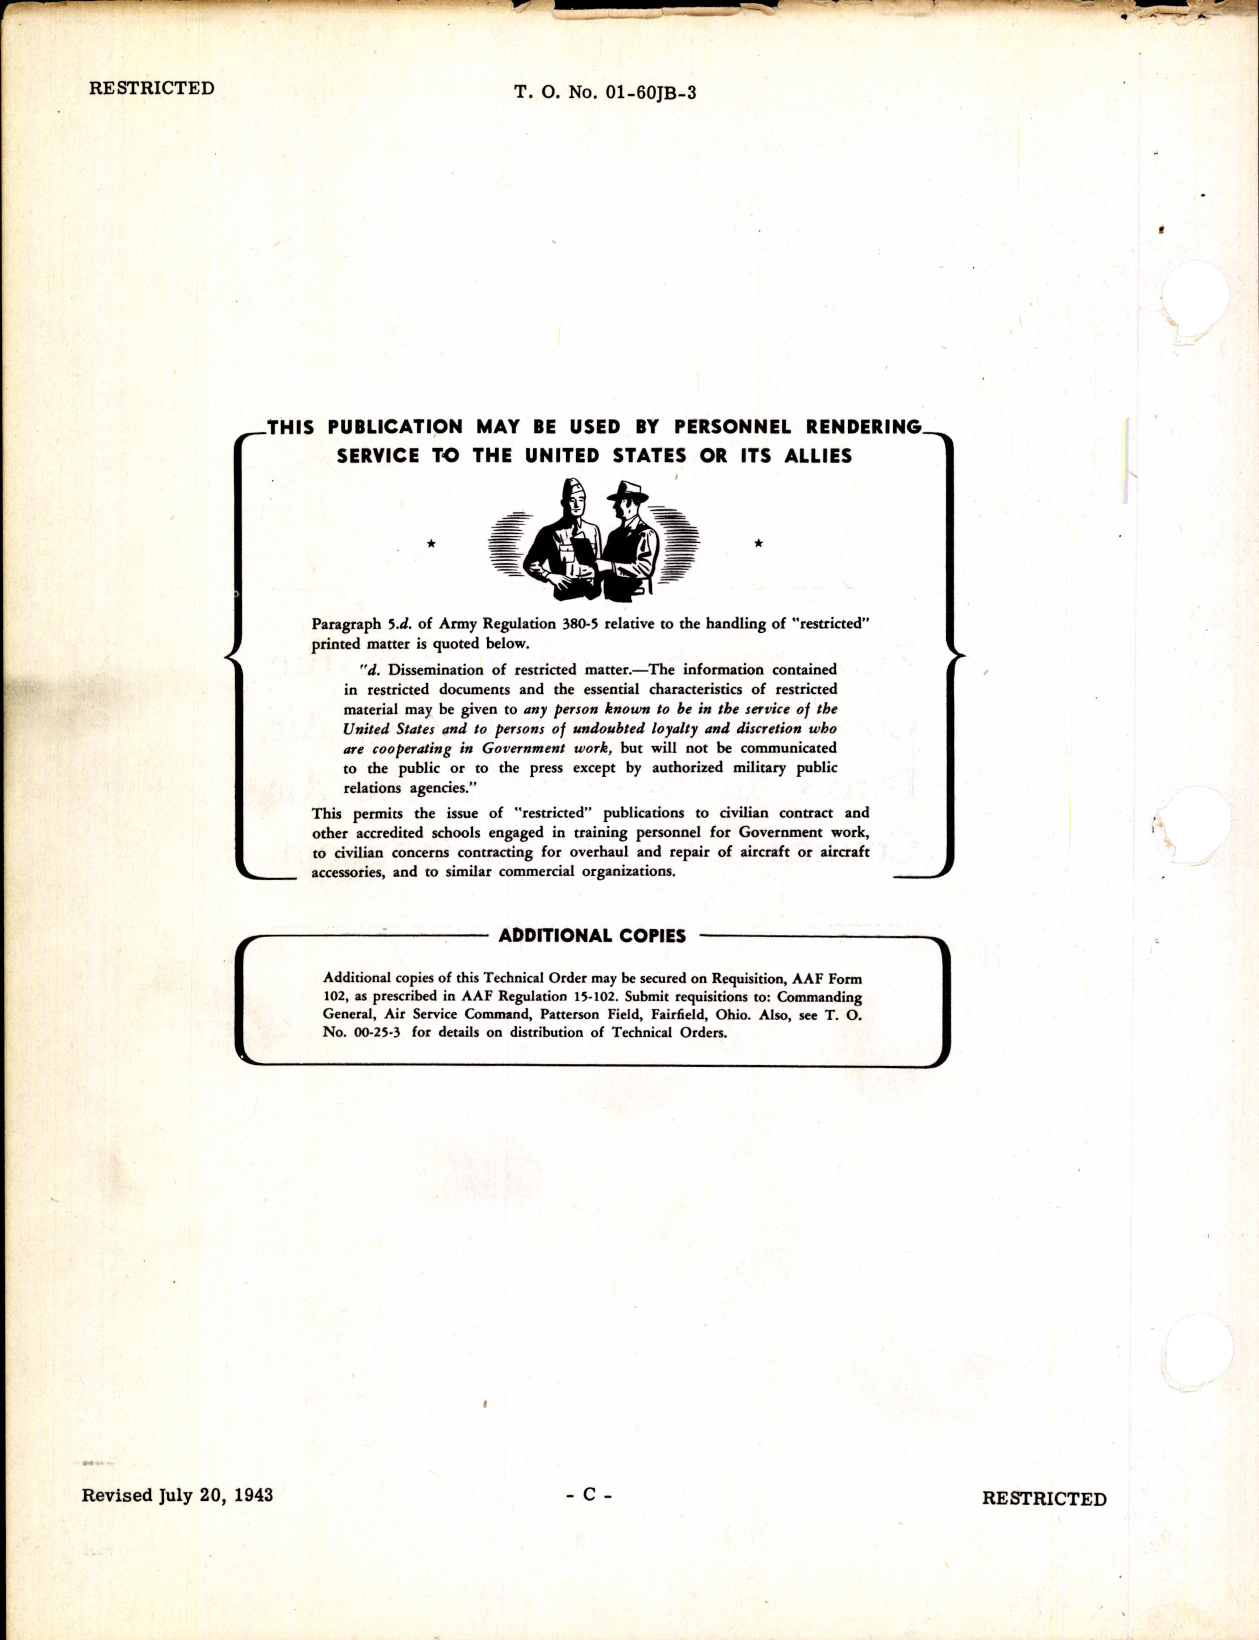 Sample page 4 from AirCorps Library document: Structural Repair Instructions for Army P-51